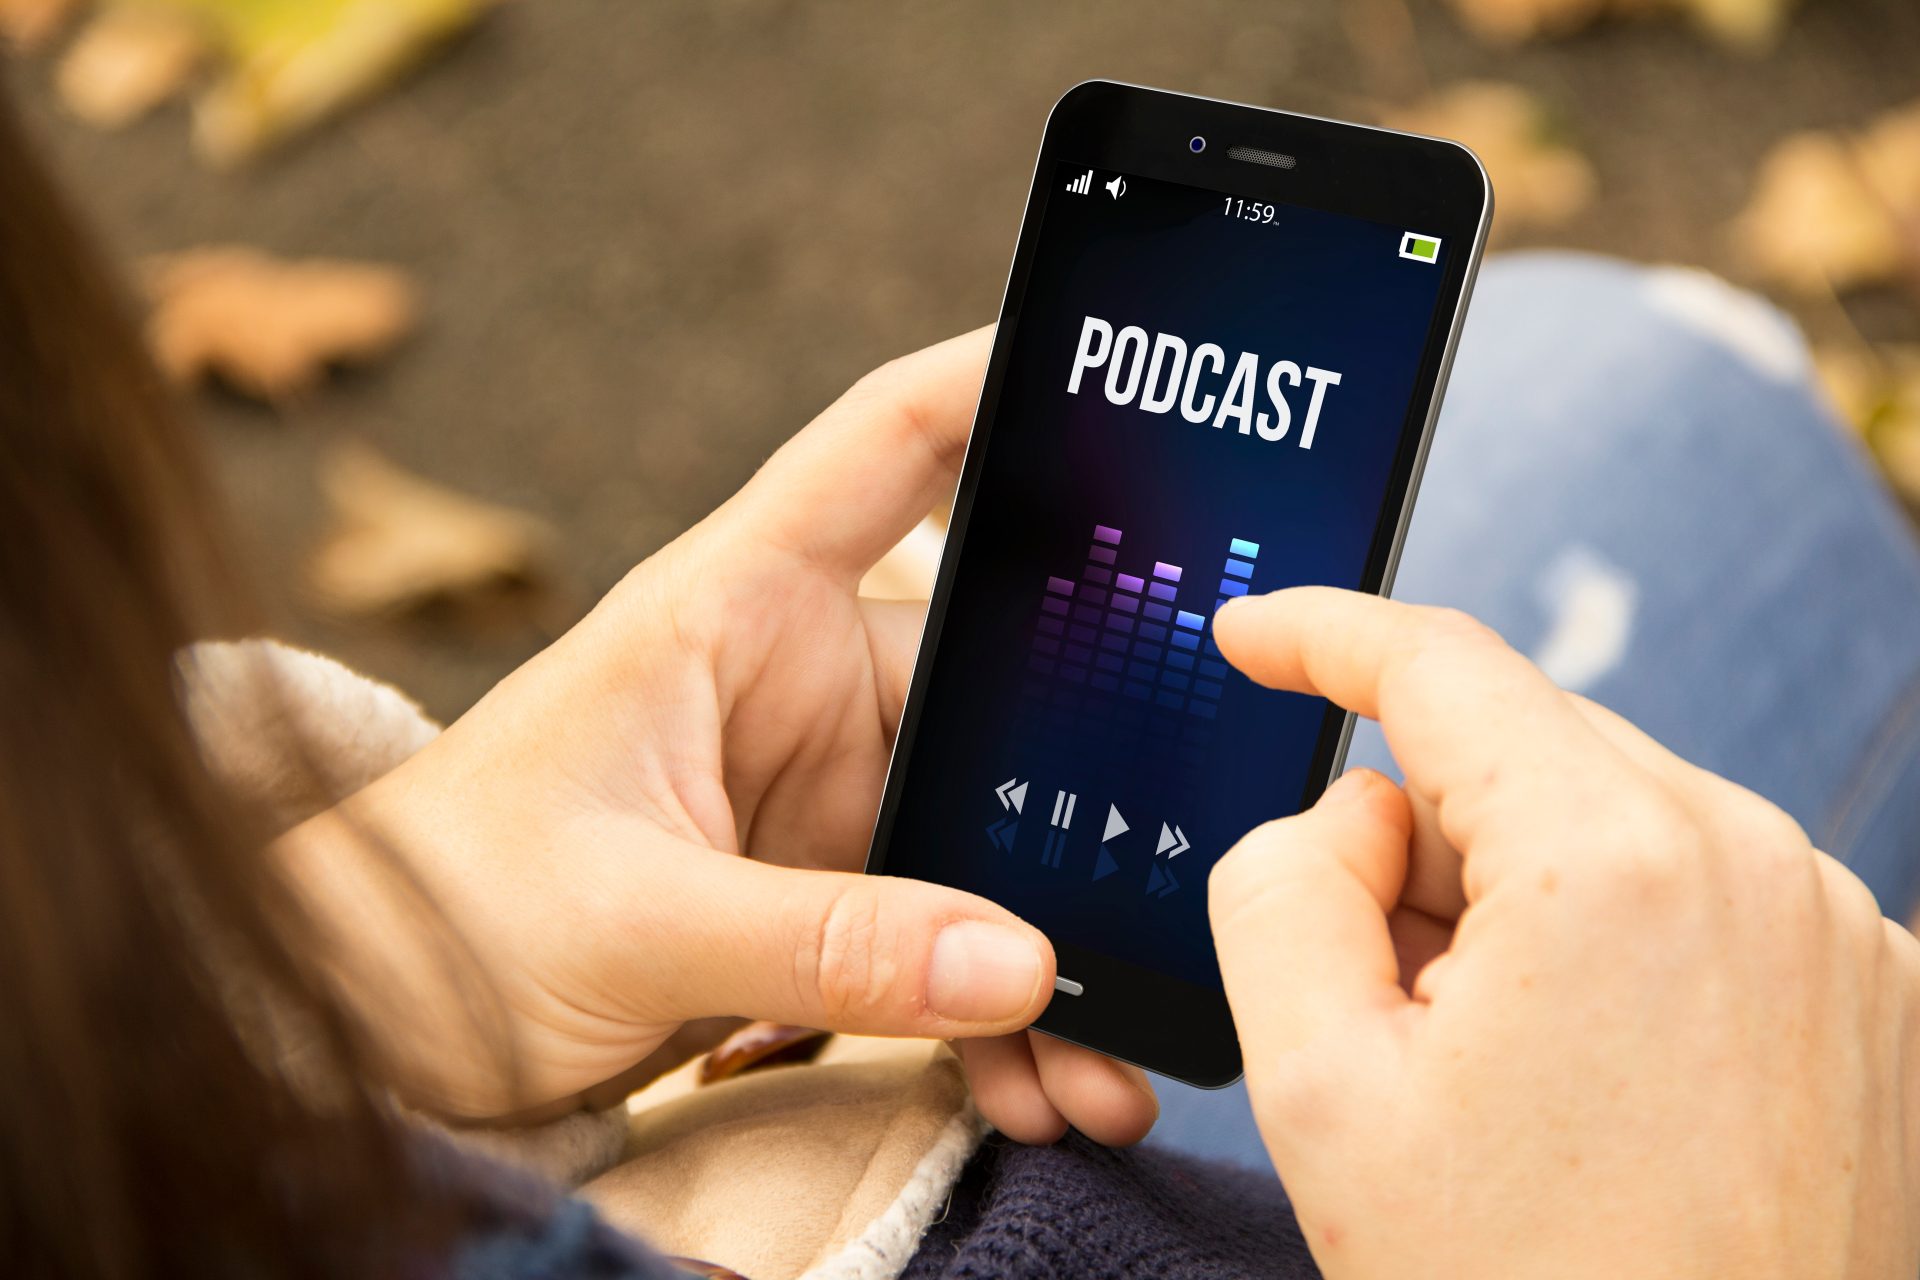 15 Podcast Cover Art Ideas So Good They’ll Have to Subscribe